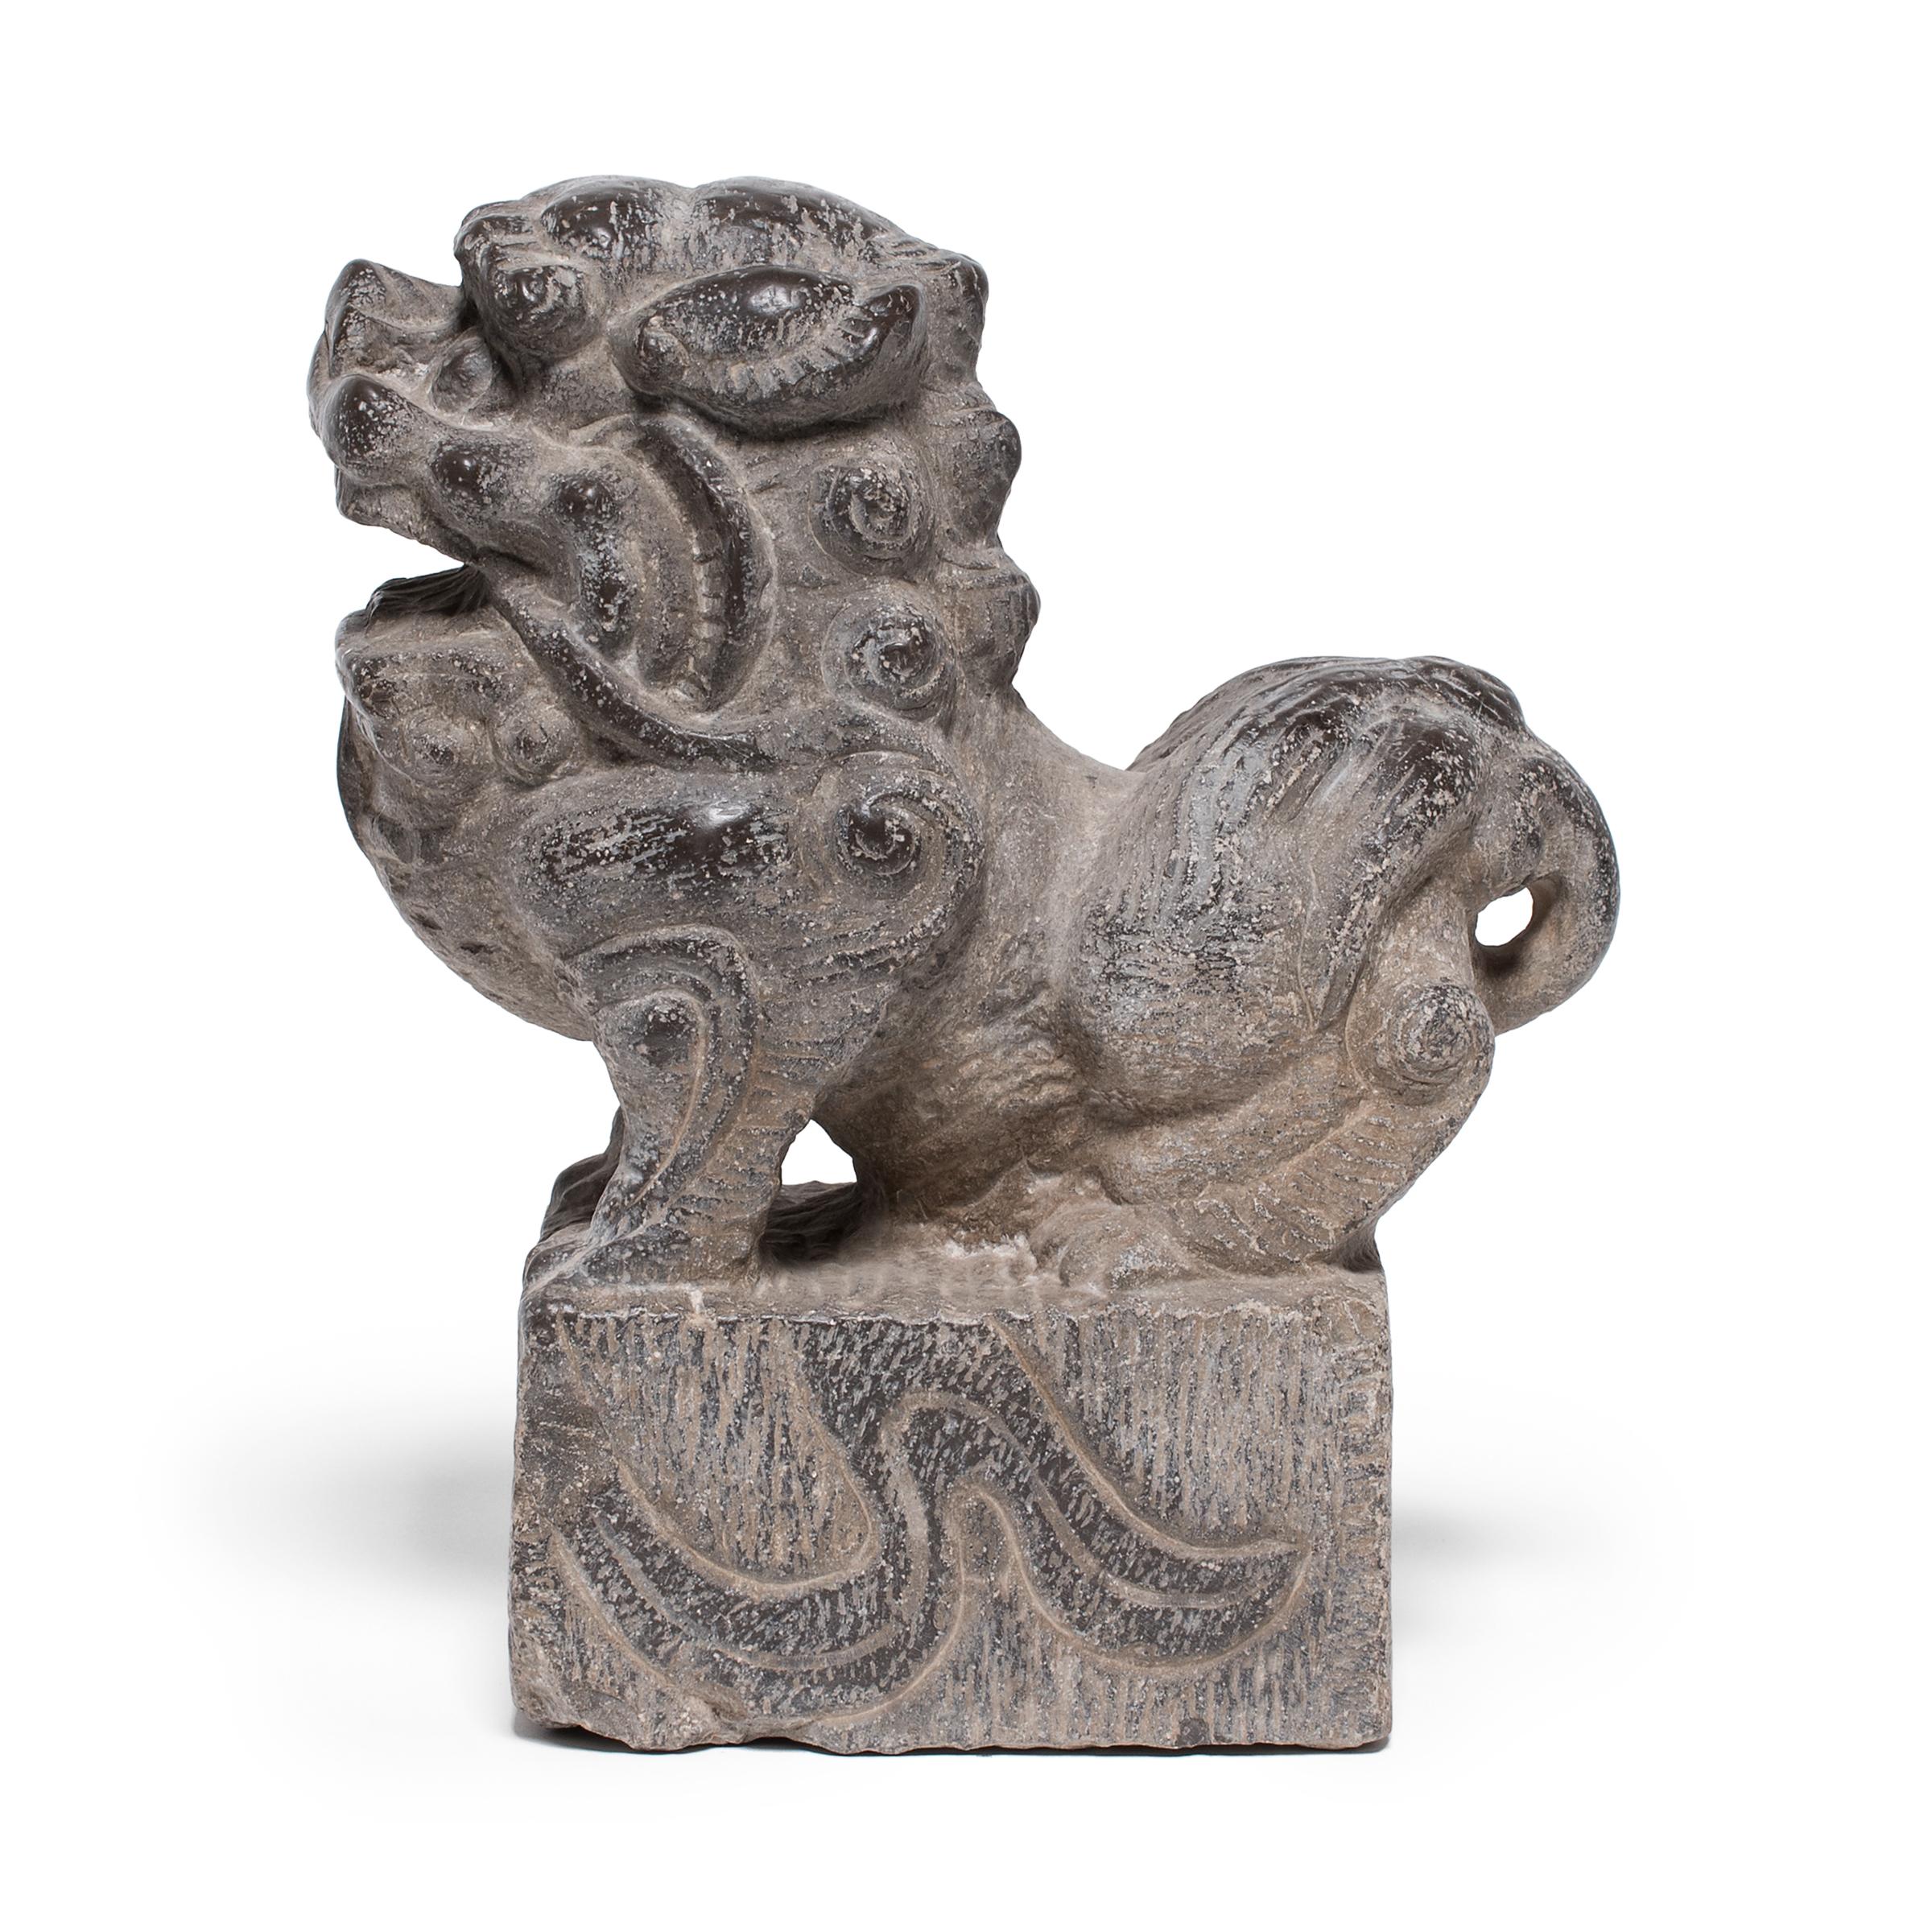 Hand-carved from a single block of limestone, this stone fu dog sits at attention as a watchful guardian of the home. He exudes a remarkable sense of life and energy - crouched on all fours with curly hair and a lively expression. Also known as